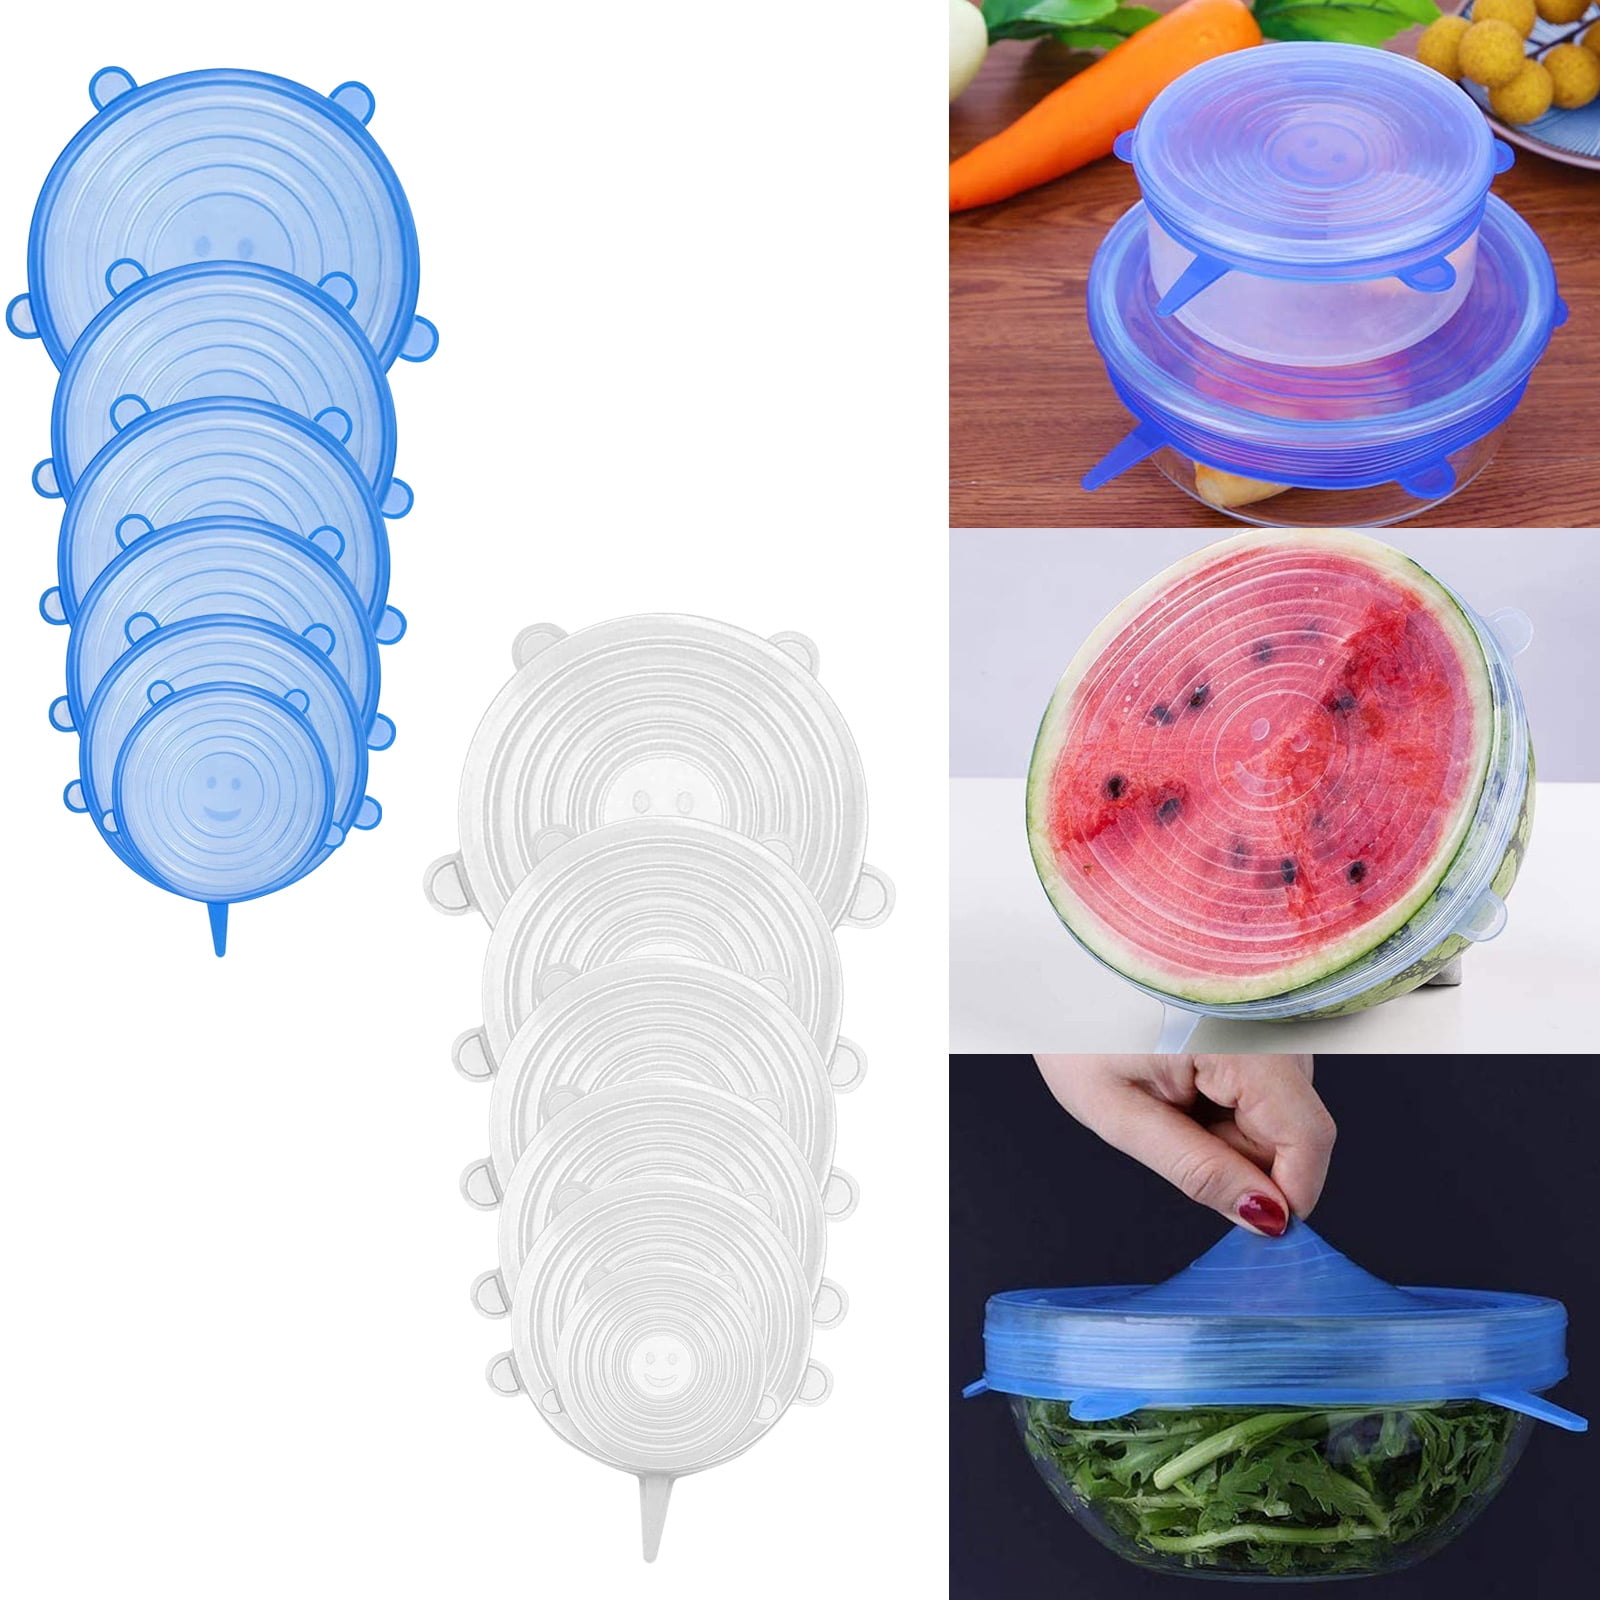 Details about   6/12/18 PCS SET STRETCH REUSABLE SILICONE BOWL FOOD CONTAINER COVER SEAL LIDS 